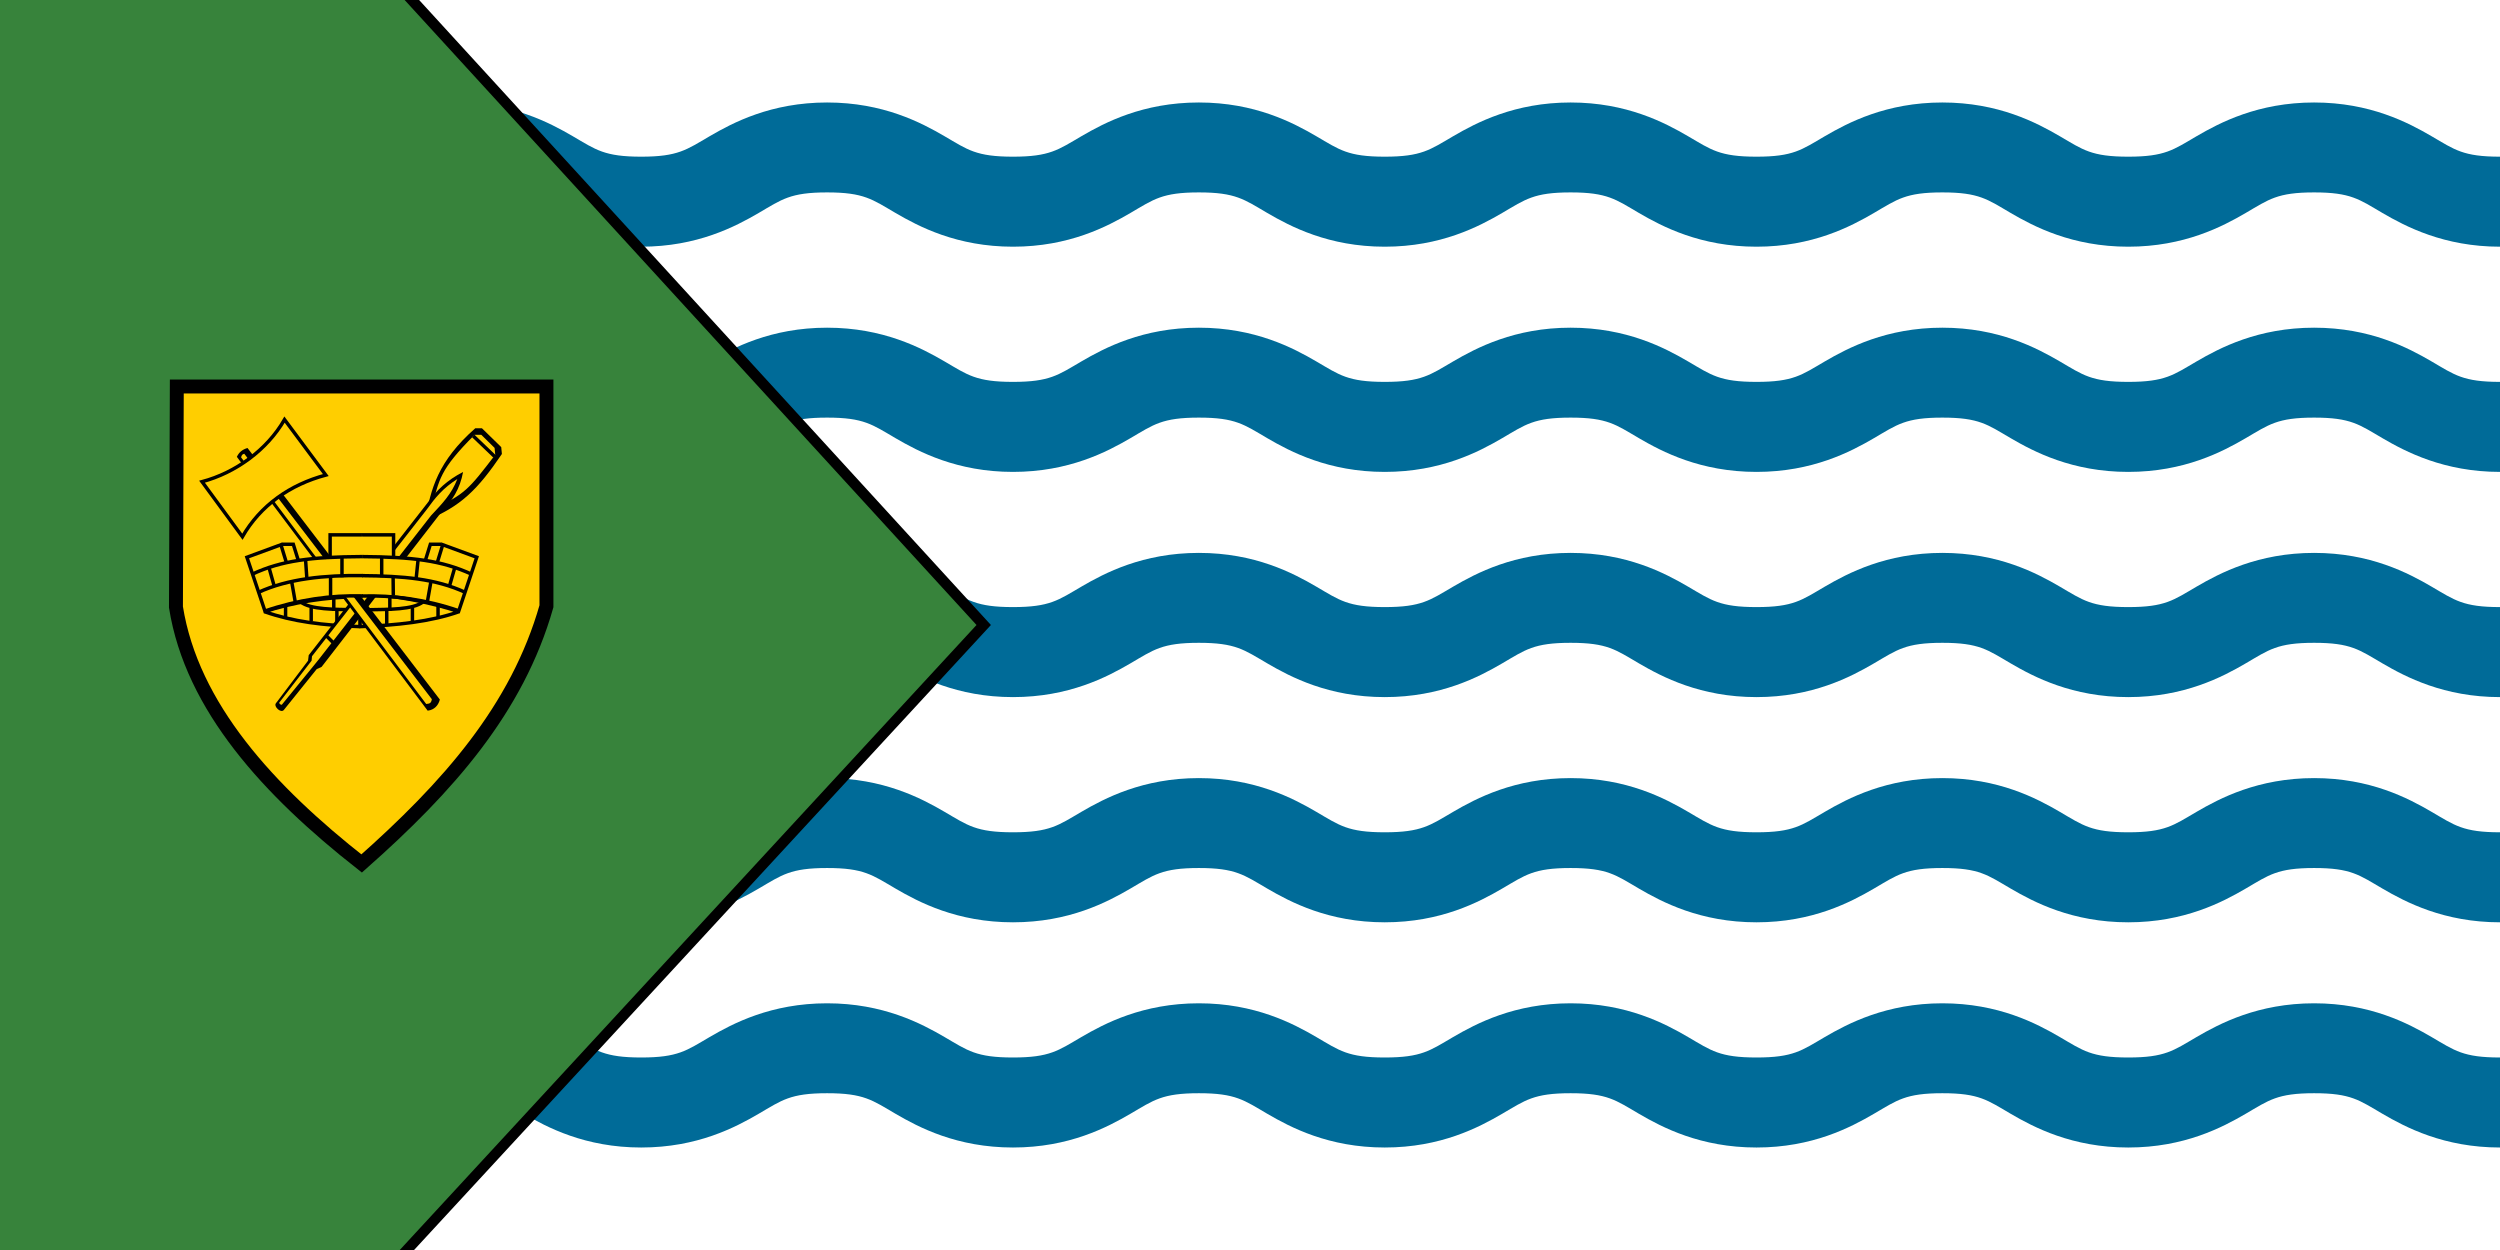 Flag of Vancouver